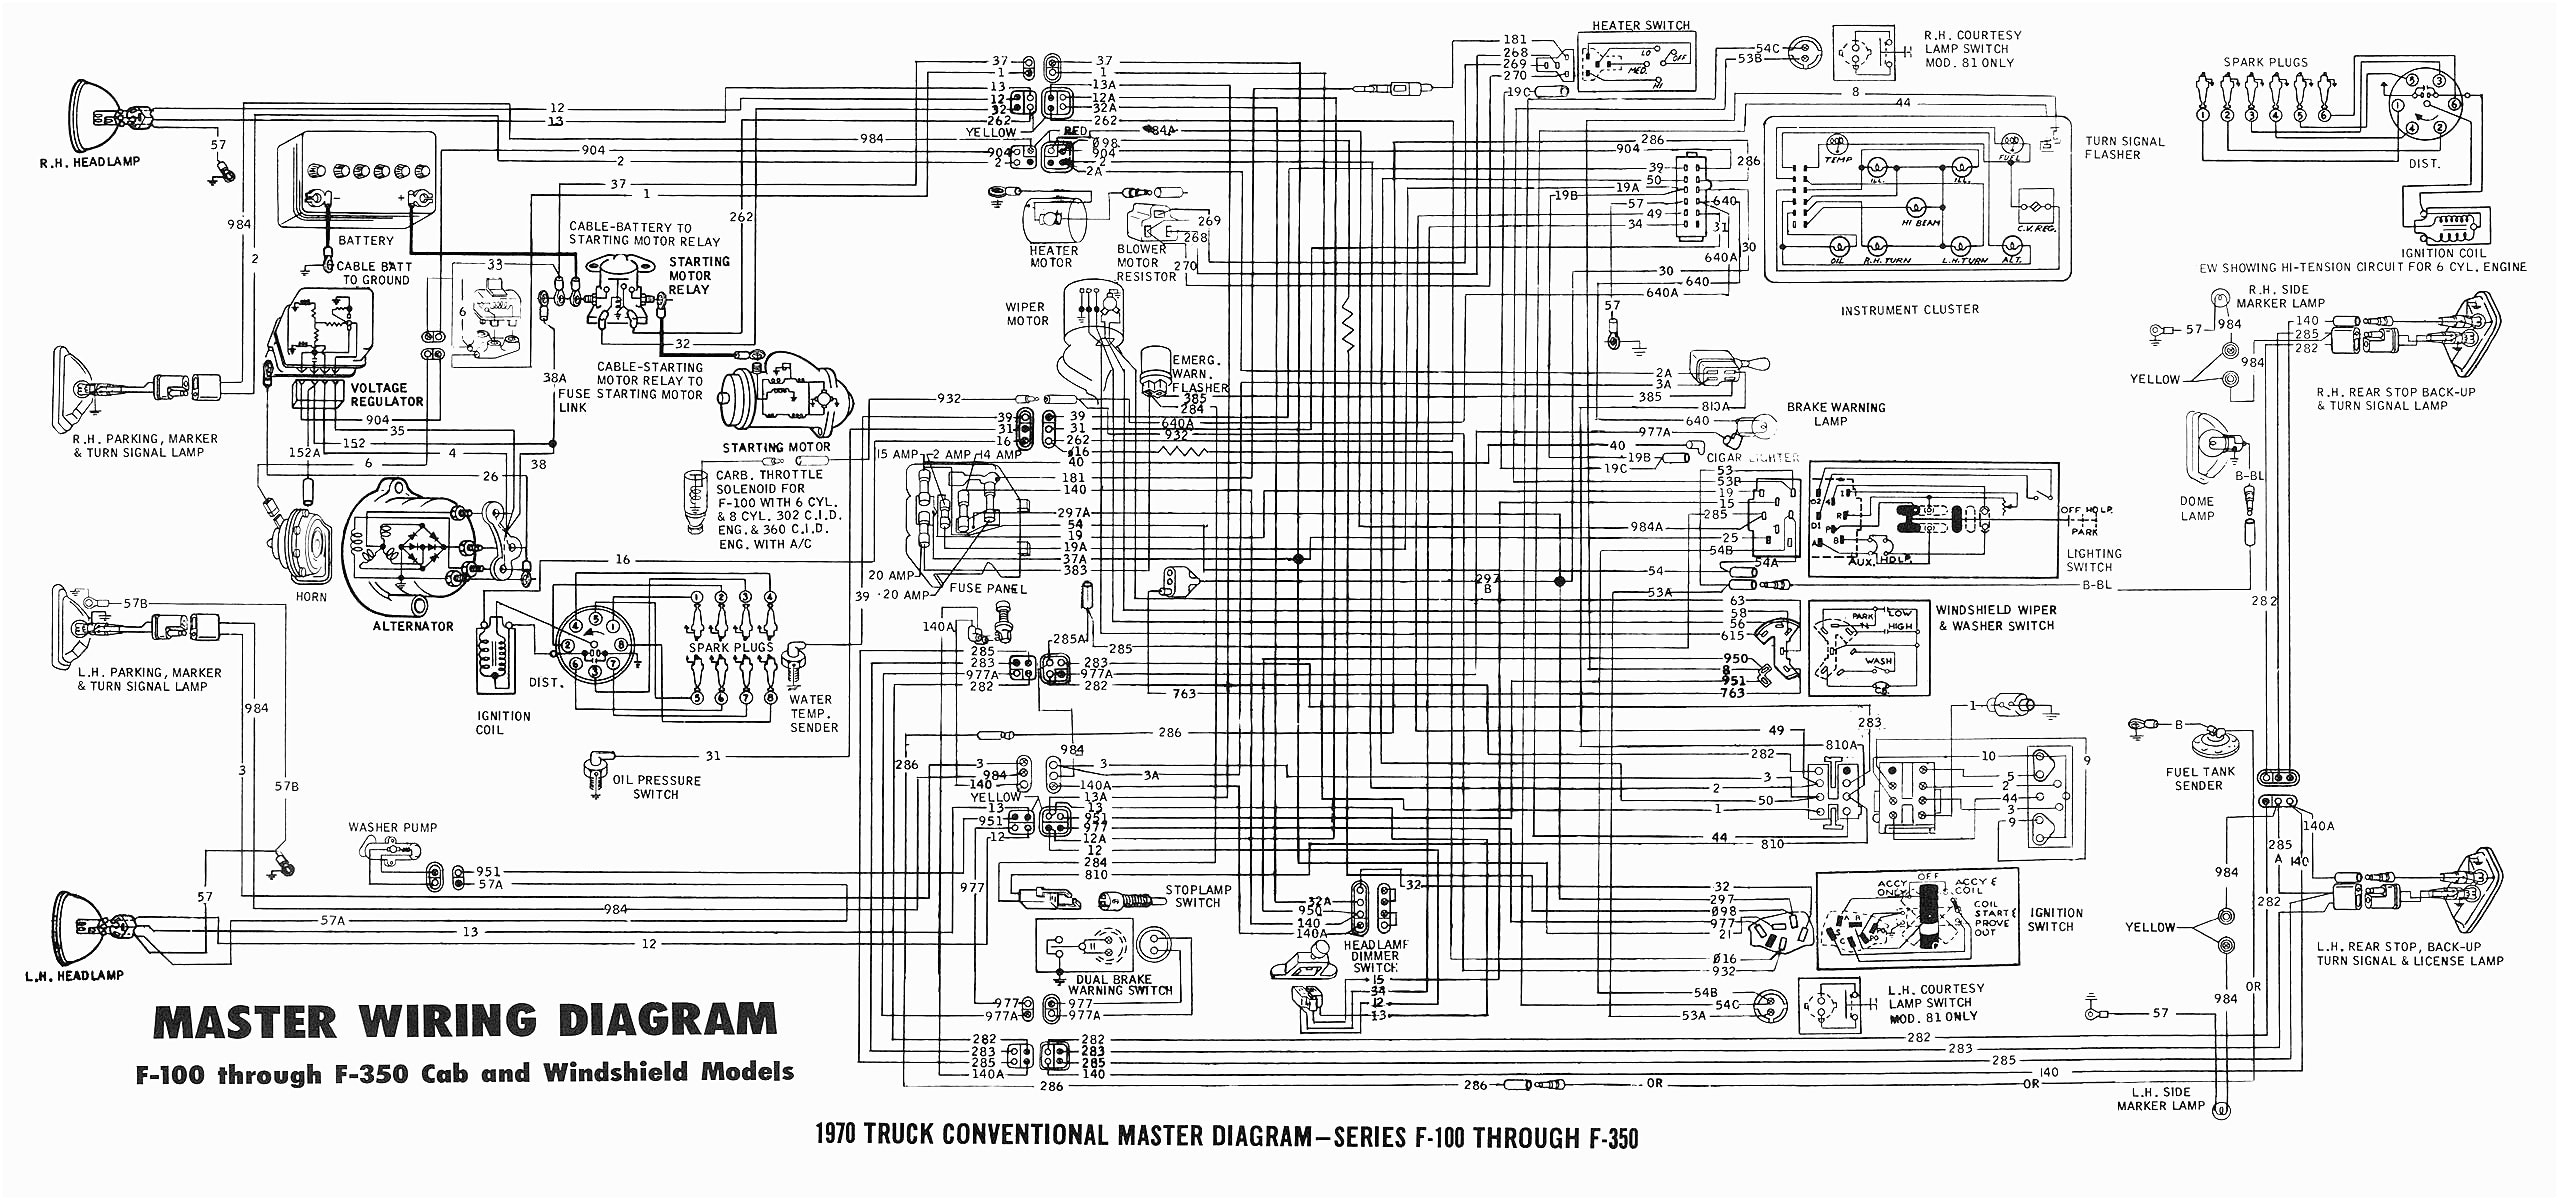 wiring diagram for ford f250 wiring diagram img 2005 ford f250 wiring diagram ford f250 electrical diagram